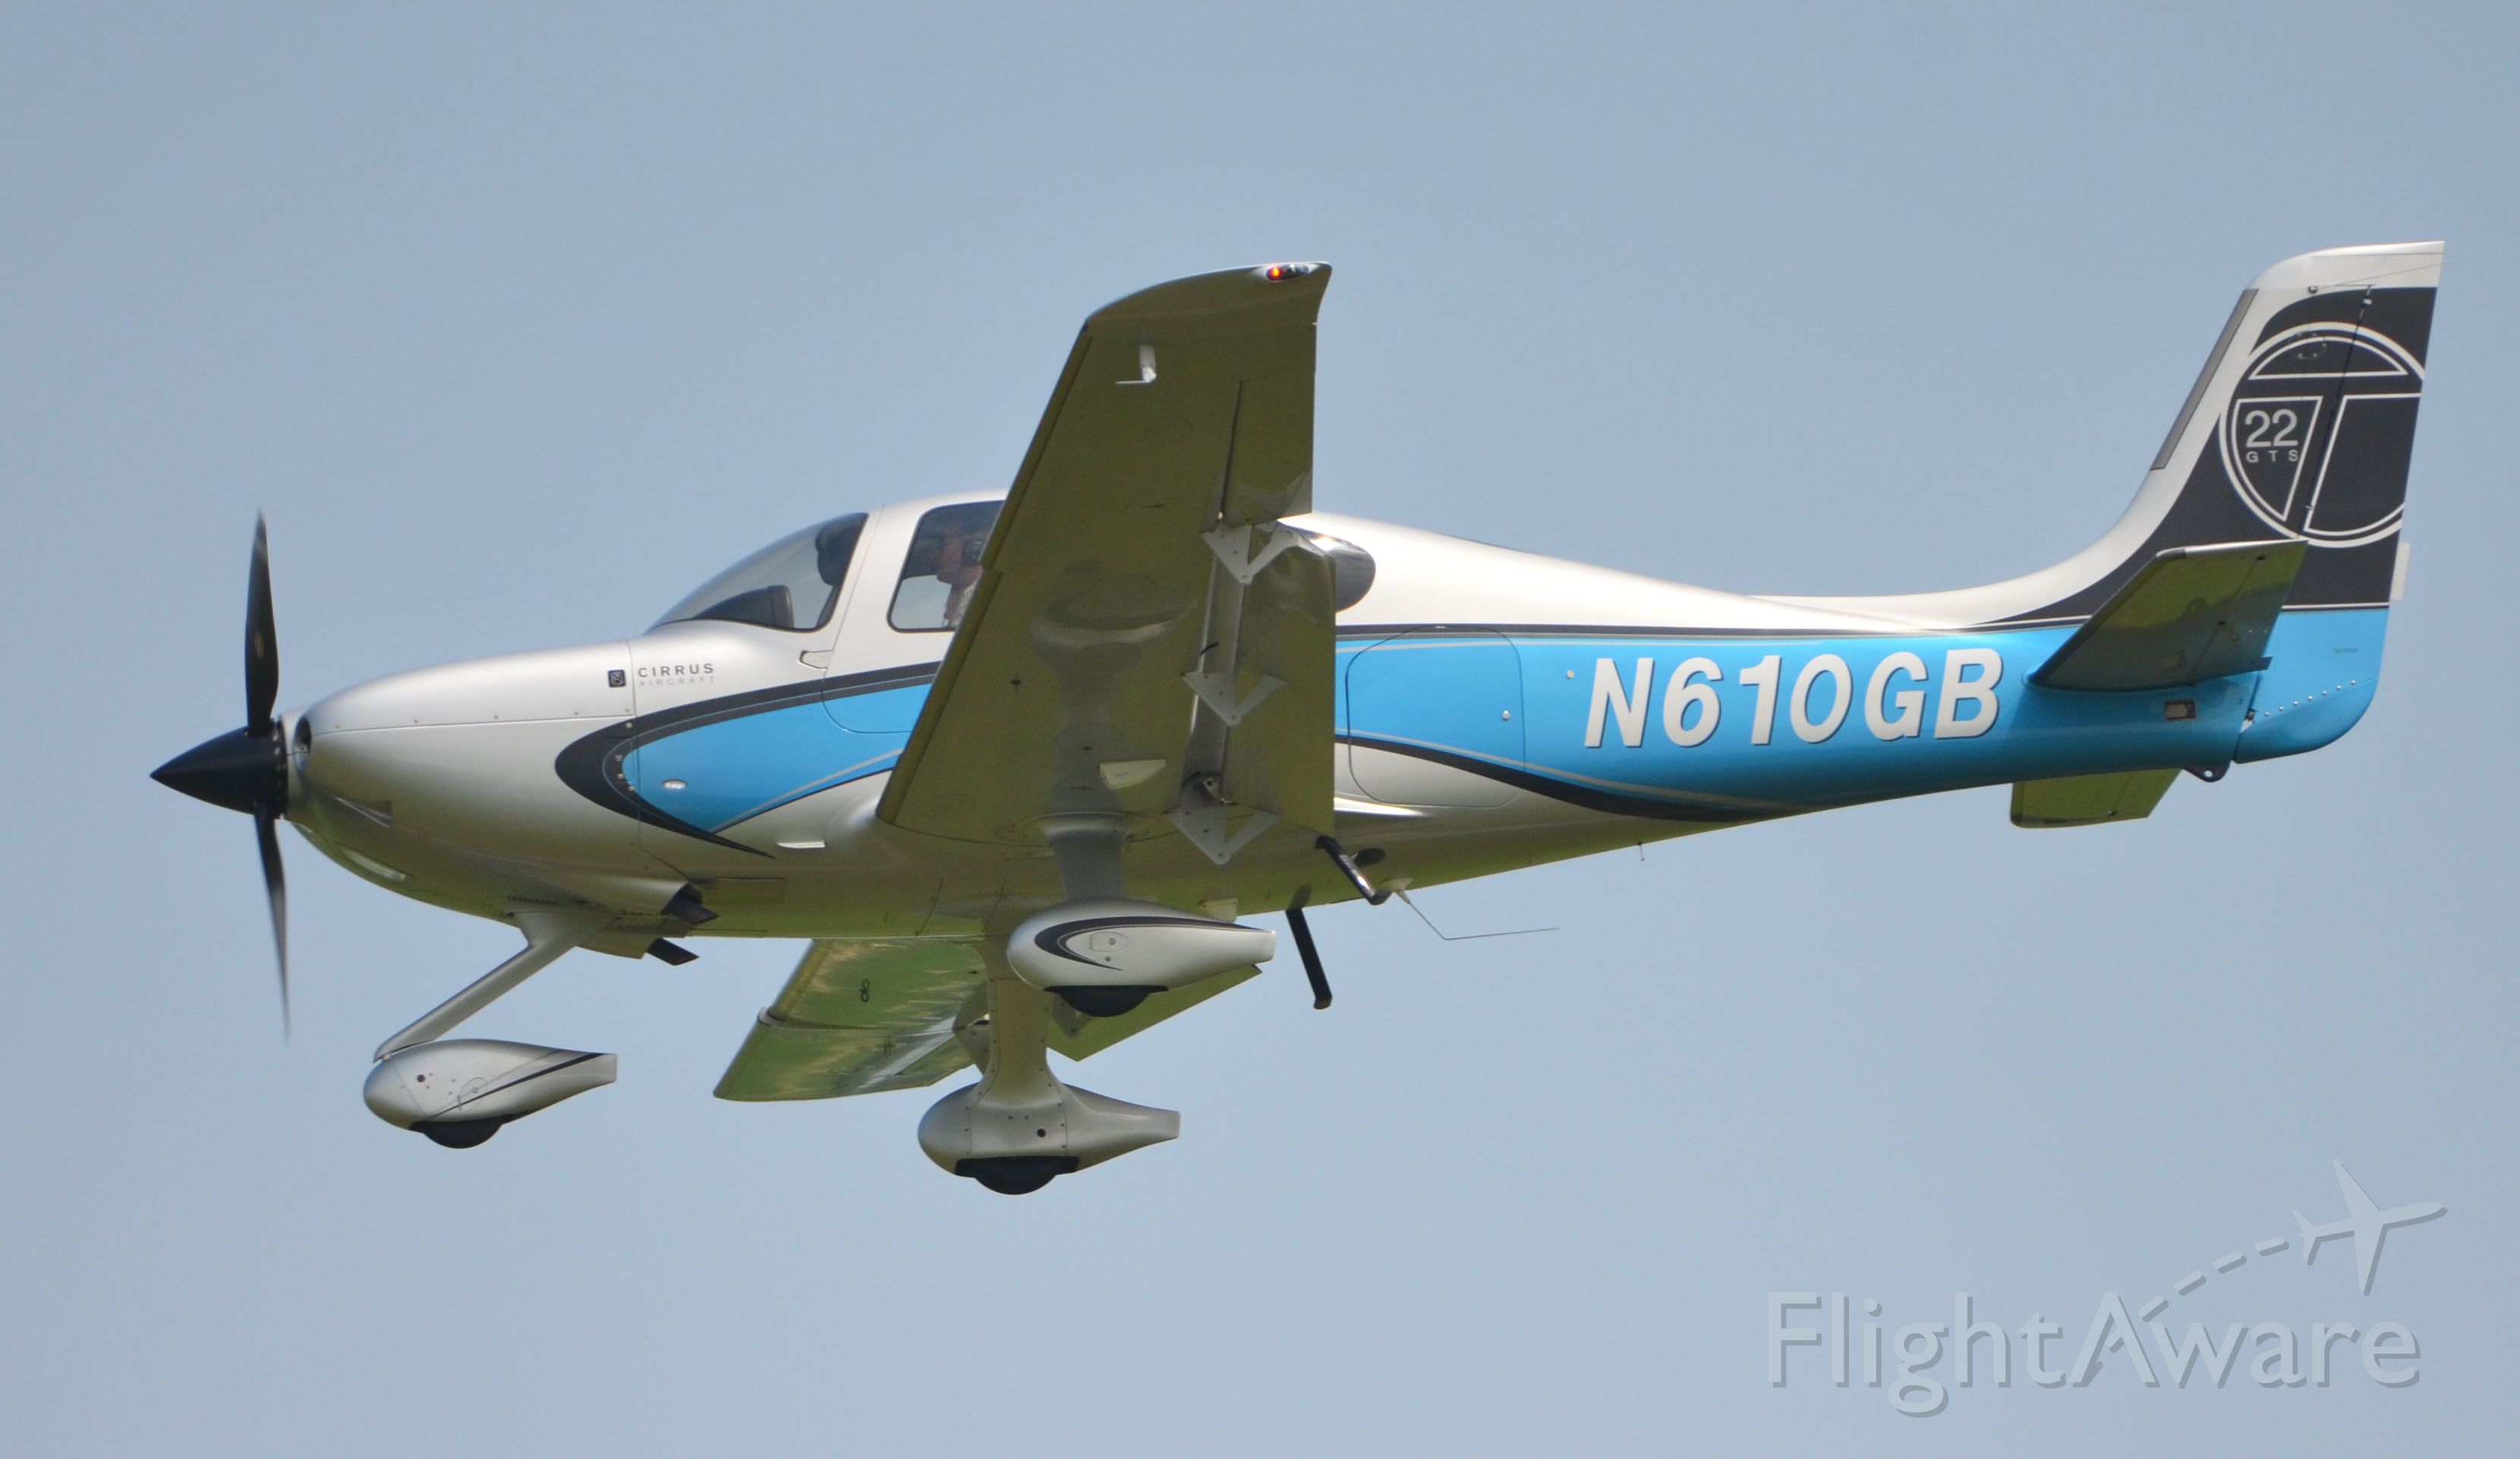 Cirrus SR-22 (N610GB) - Final approach to runway 36 at Airventure 2018 on Sunday.